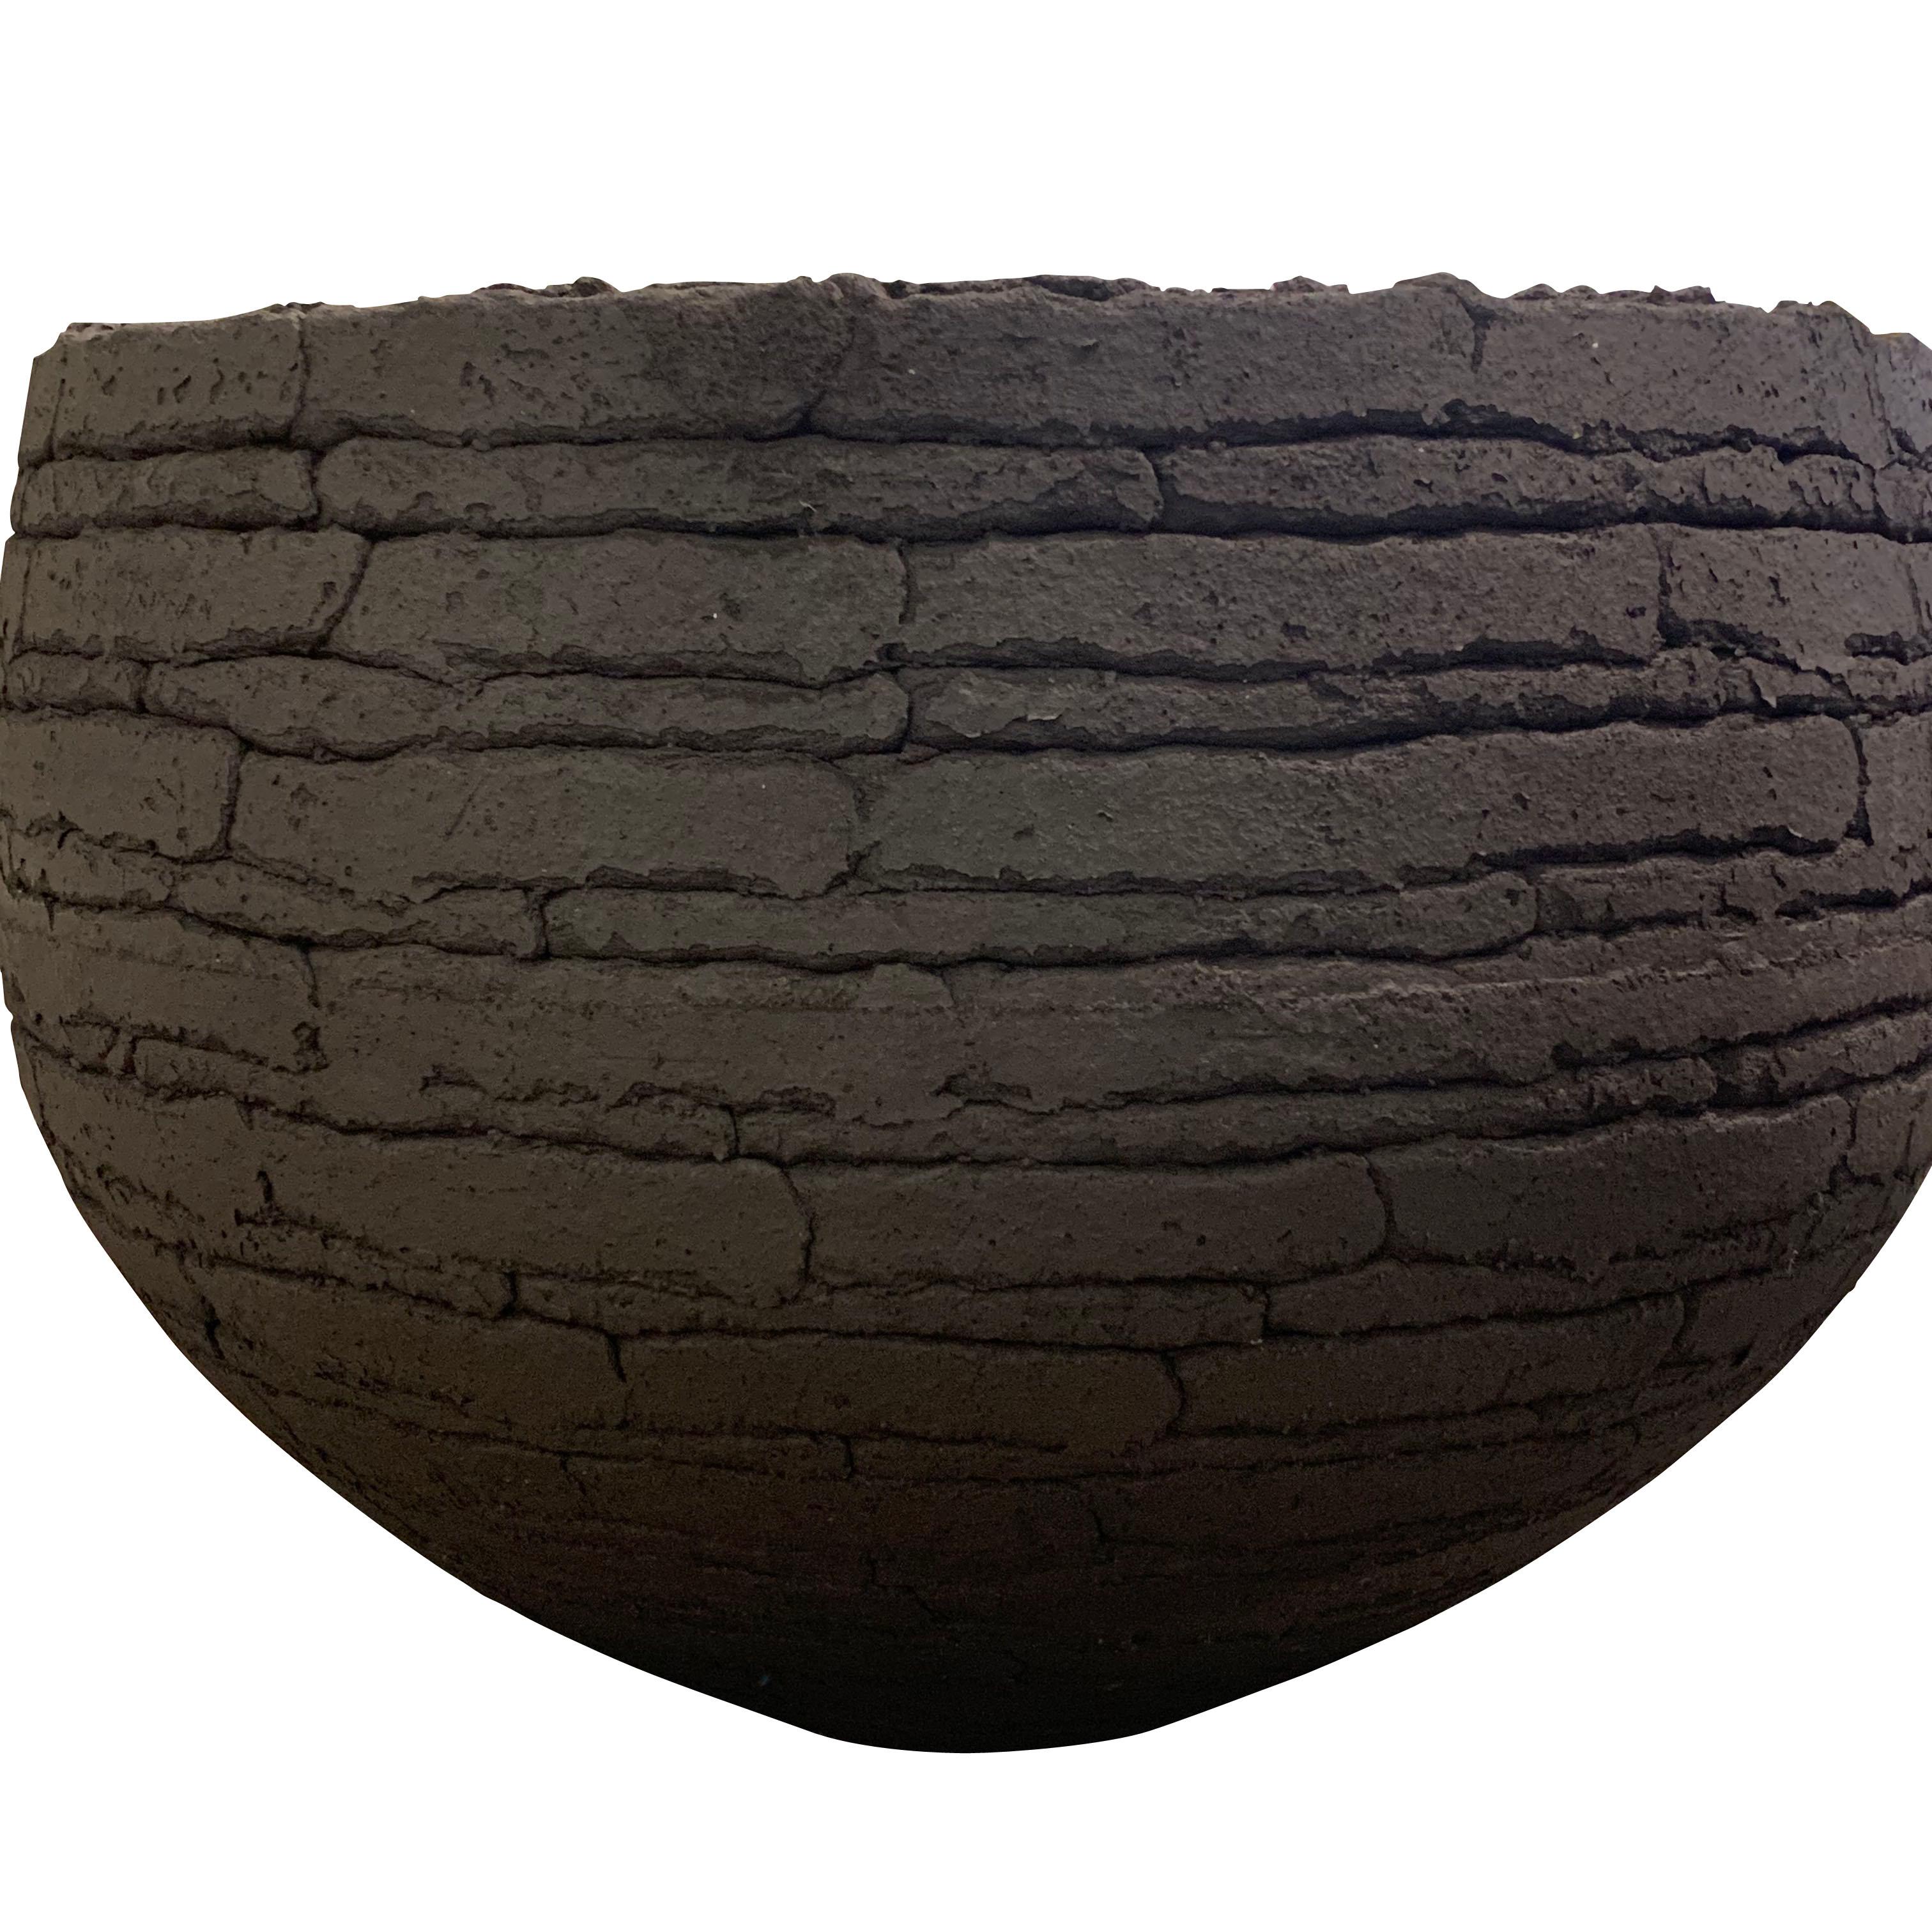 Contemporary Belgian pair of black extra large planters made of terracotta.
Horizontal texture

  